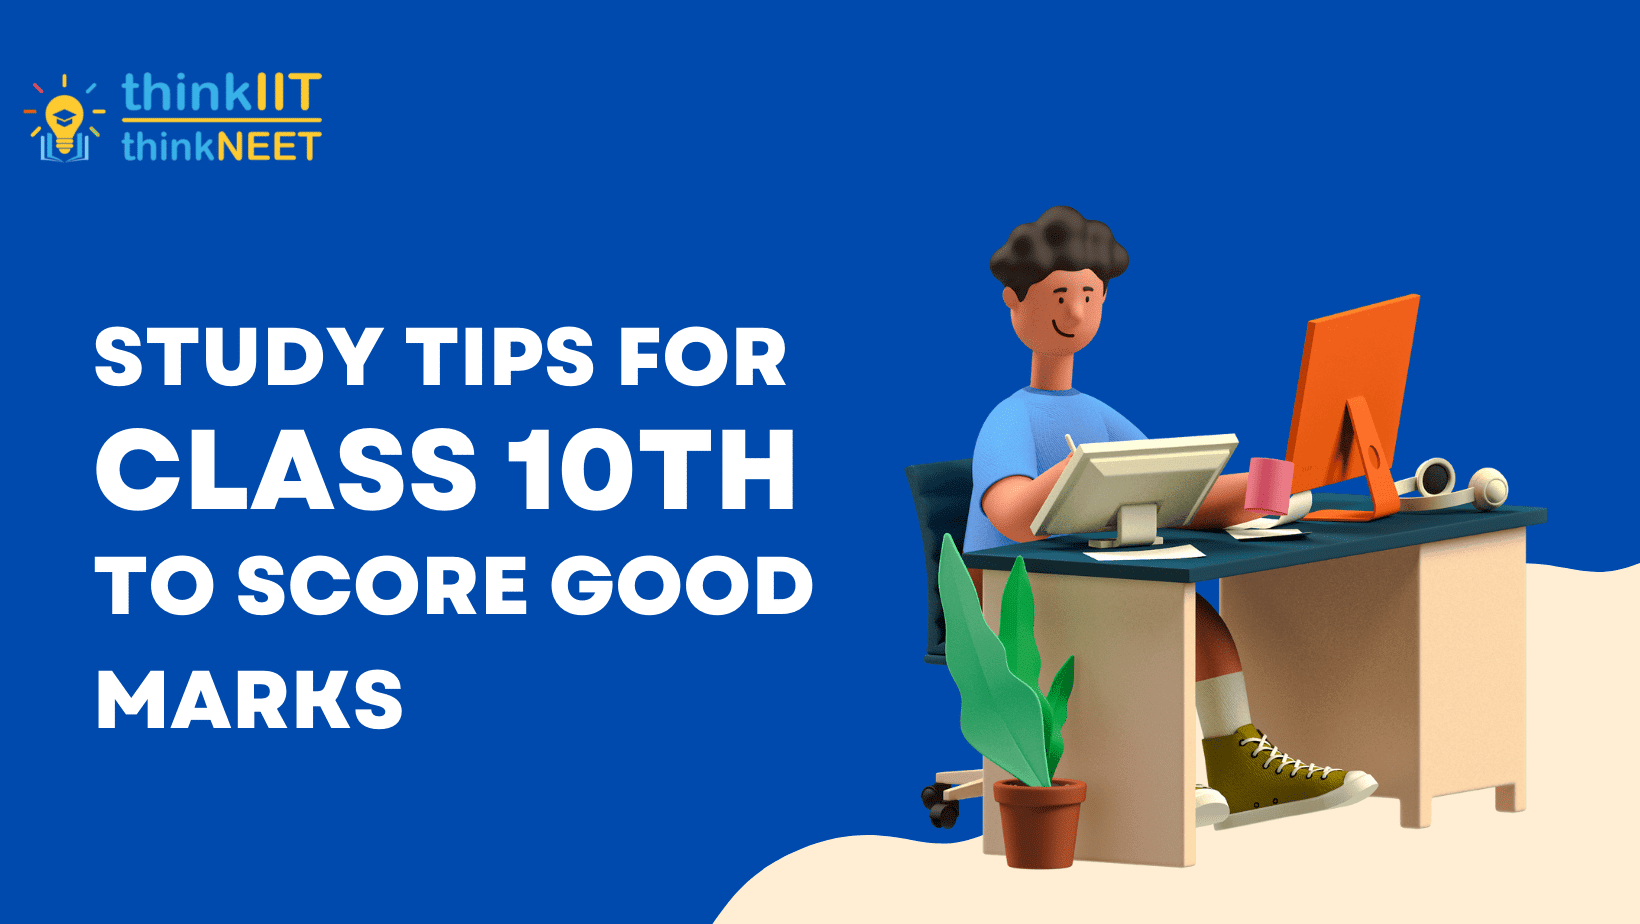 Study tips for class 10th to score good marks